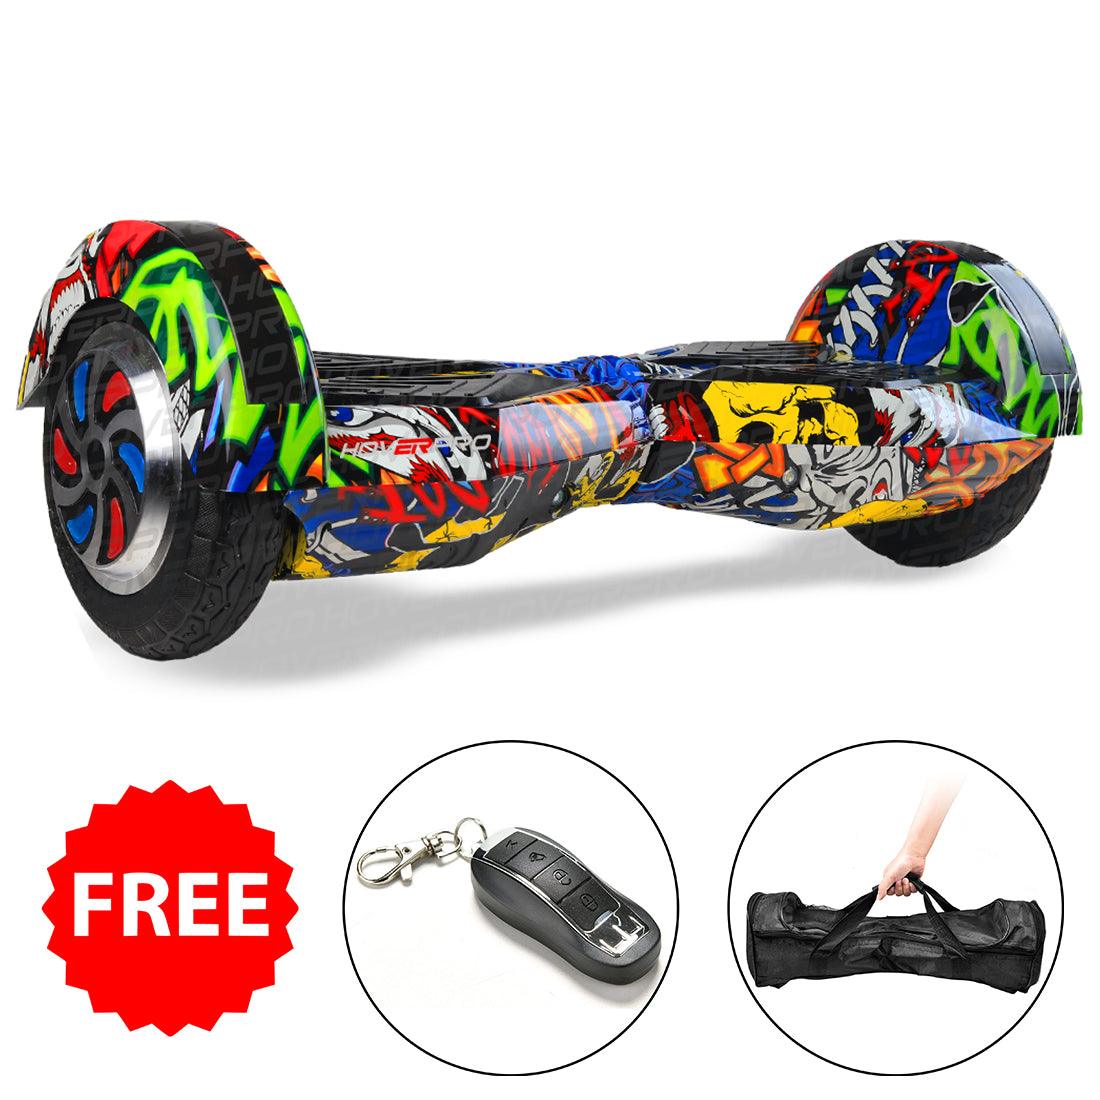 PATOYS | H8 Skullcandy Hoverboard with Remote, Bag and Long Range Battery (Assorted Color) - PATOYS